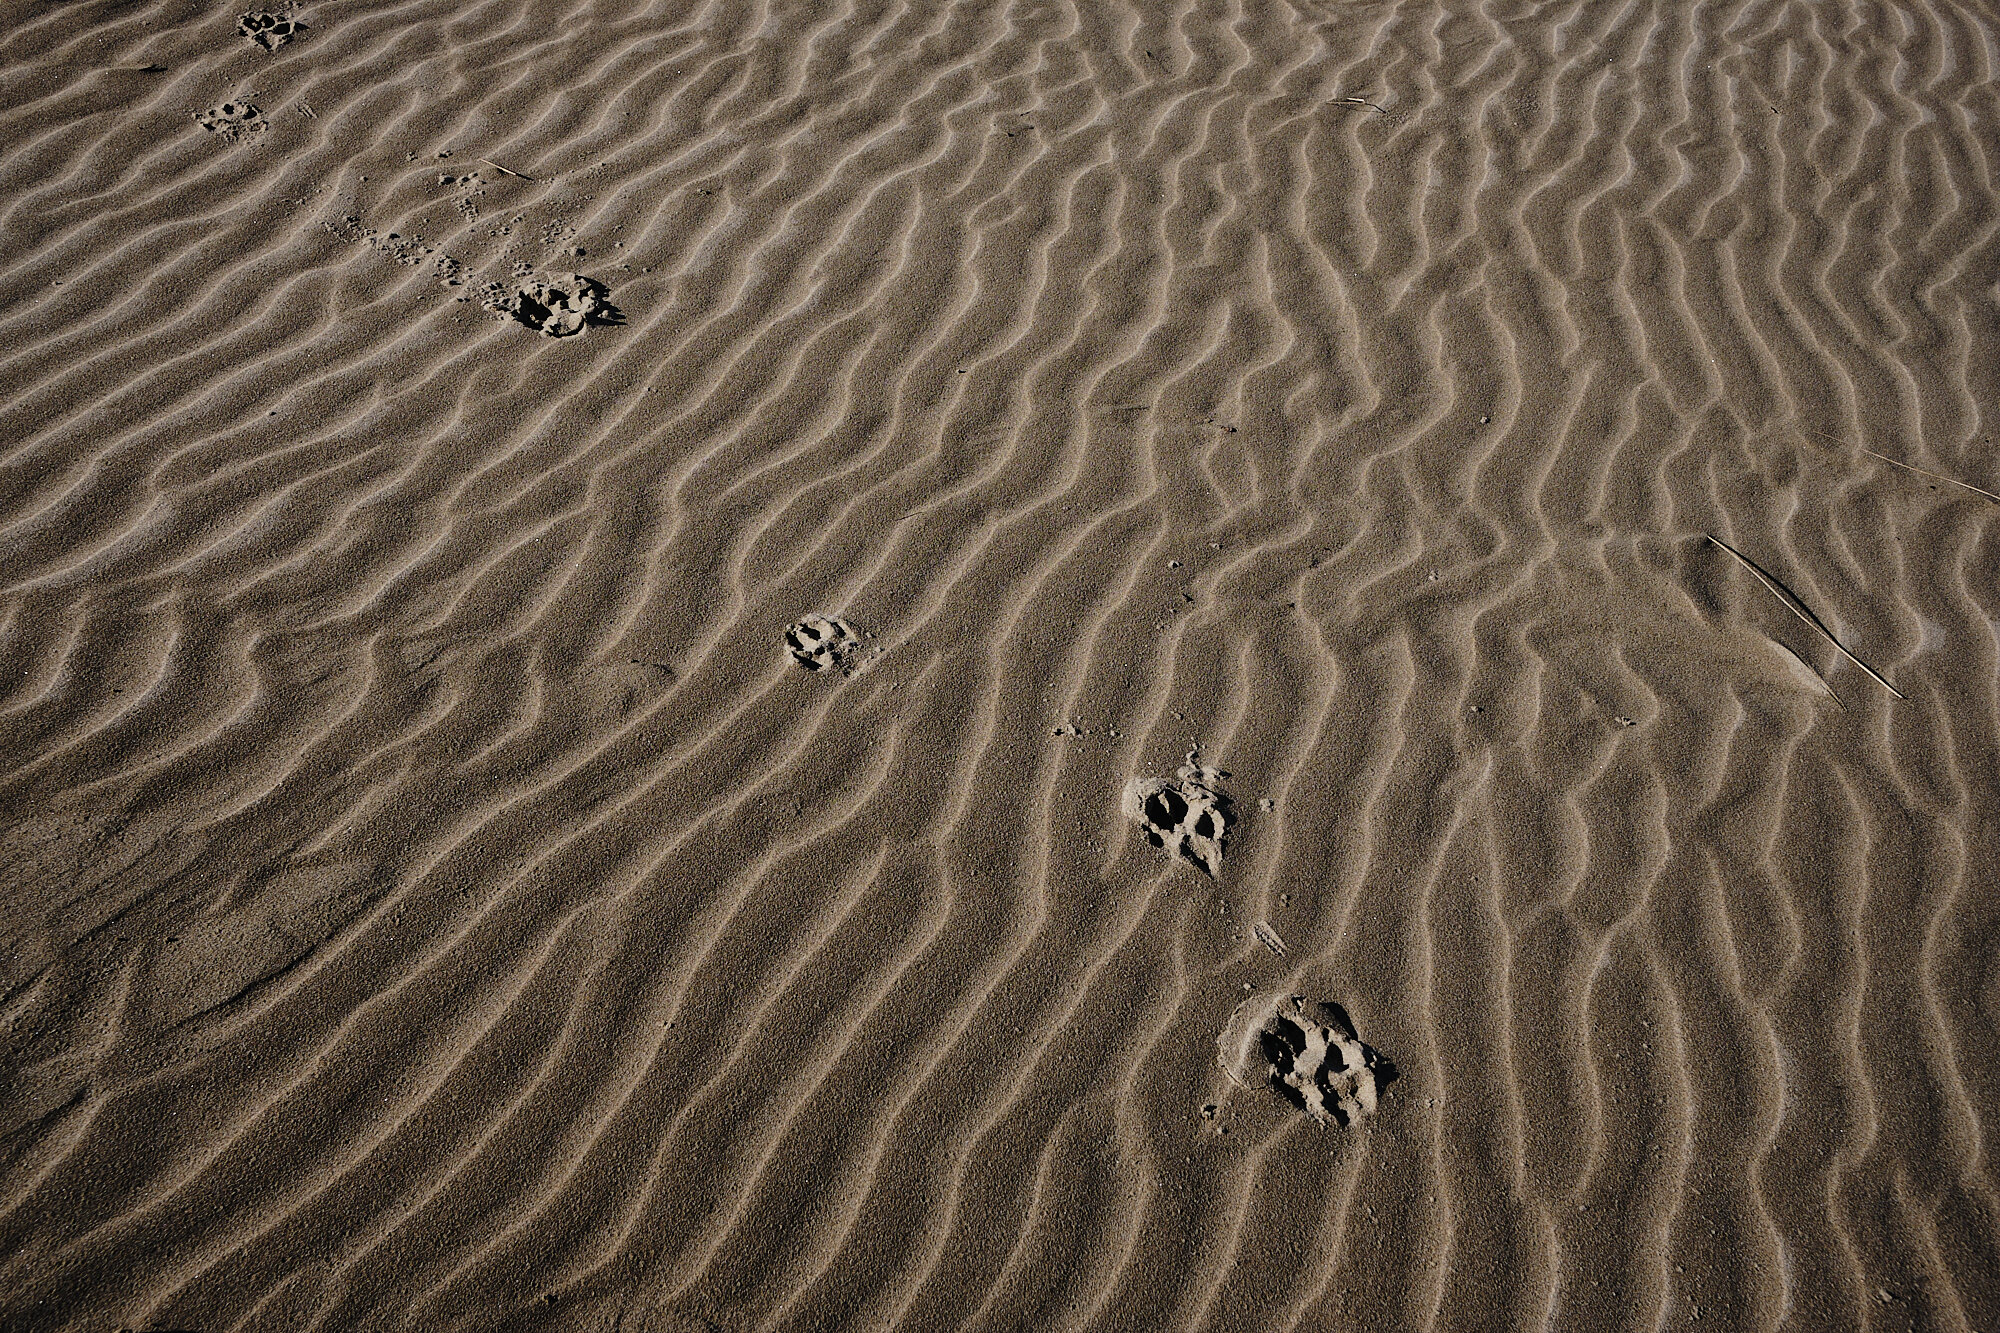  Puppy prints in the sand on the Oregon coast, hard to get more pleasant than this! | 10/31/20 Newport, OR 